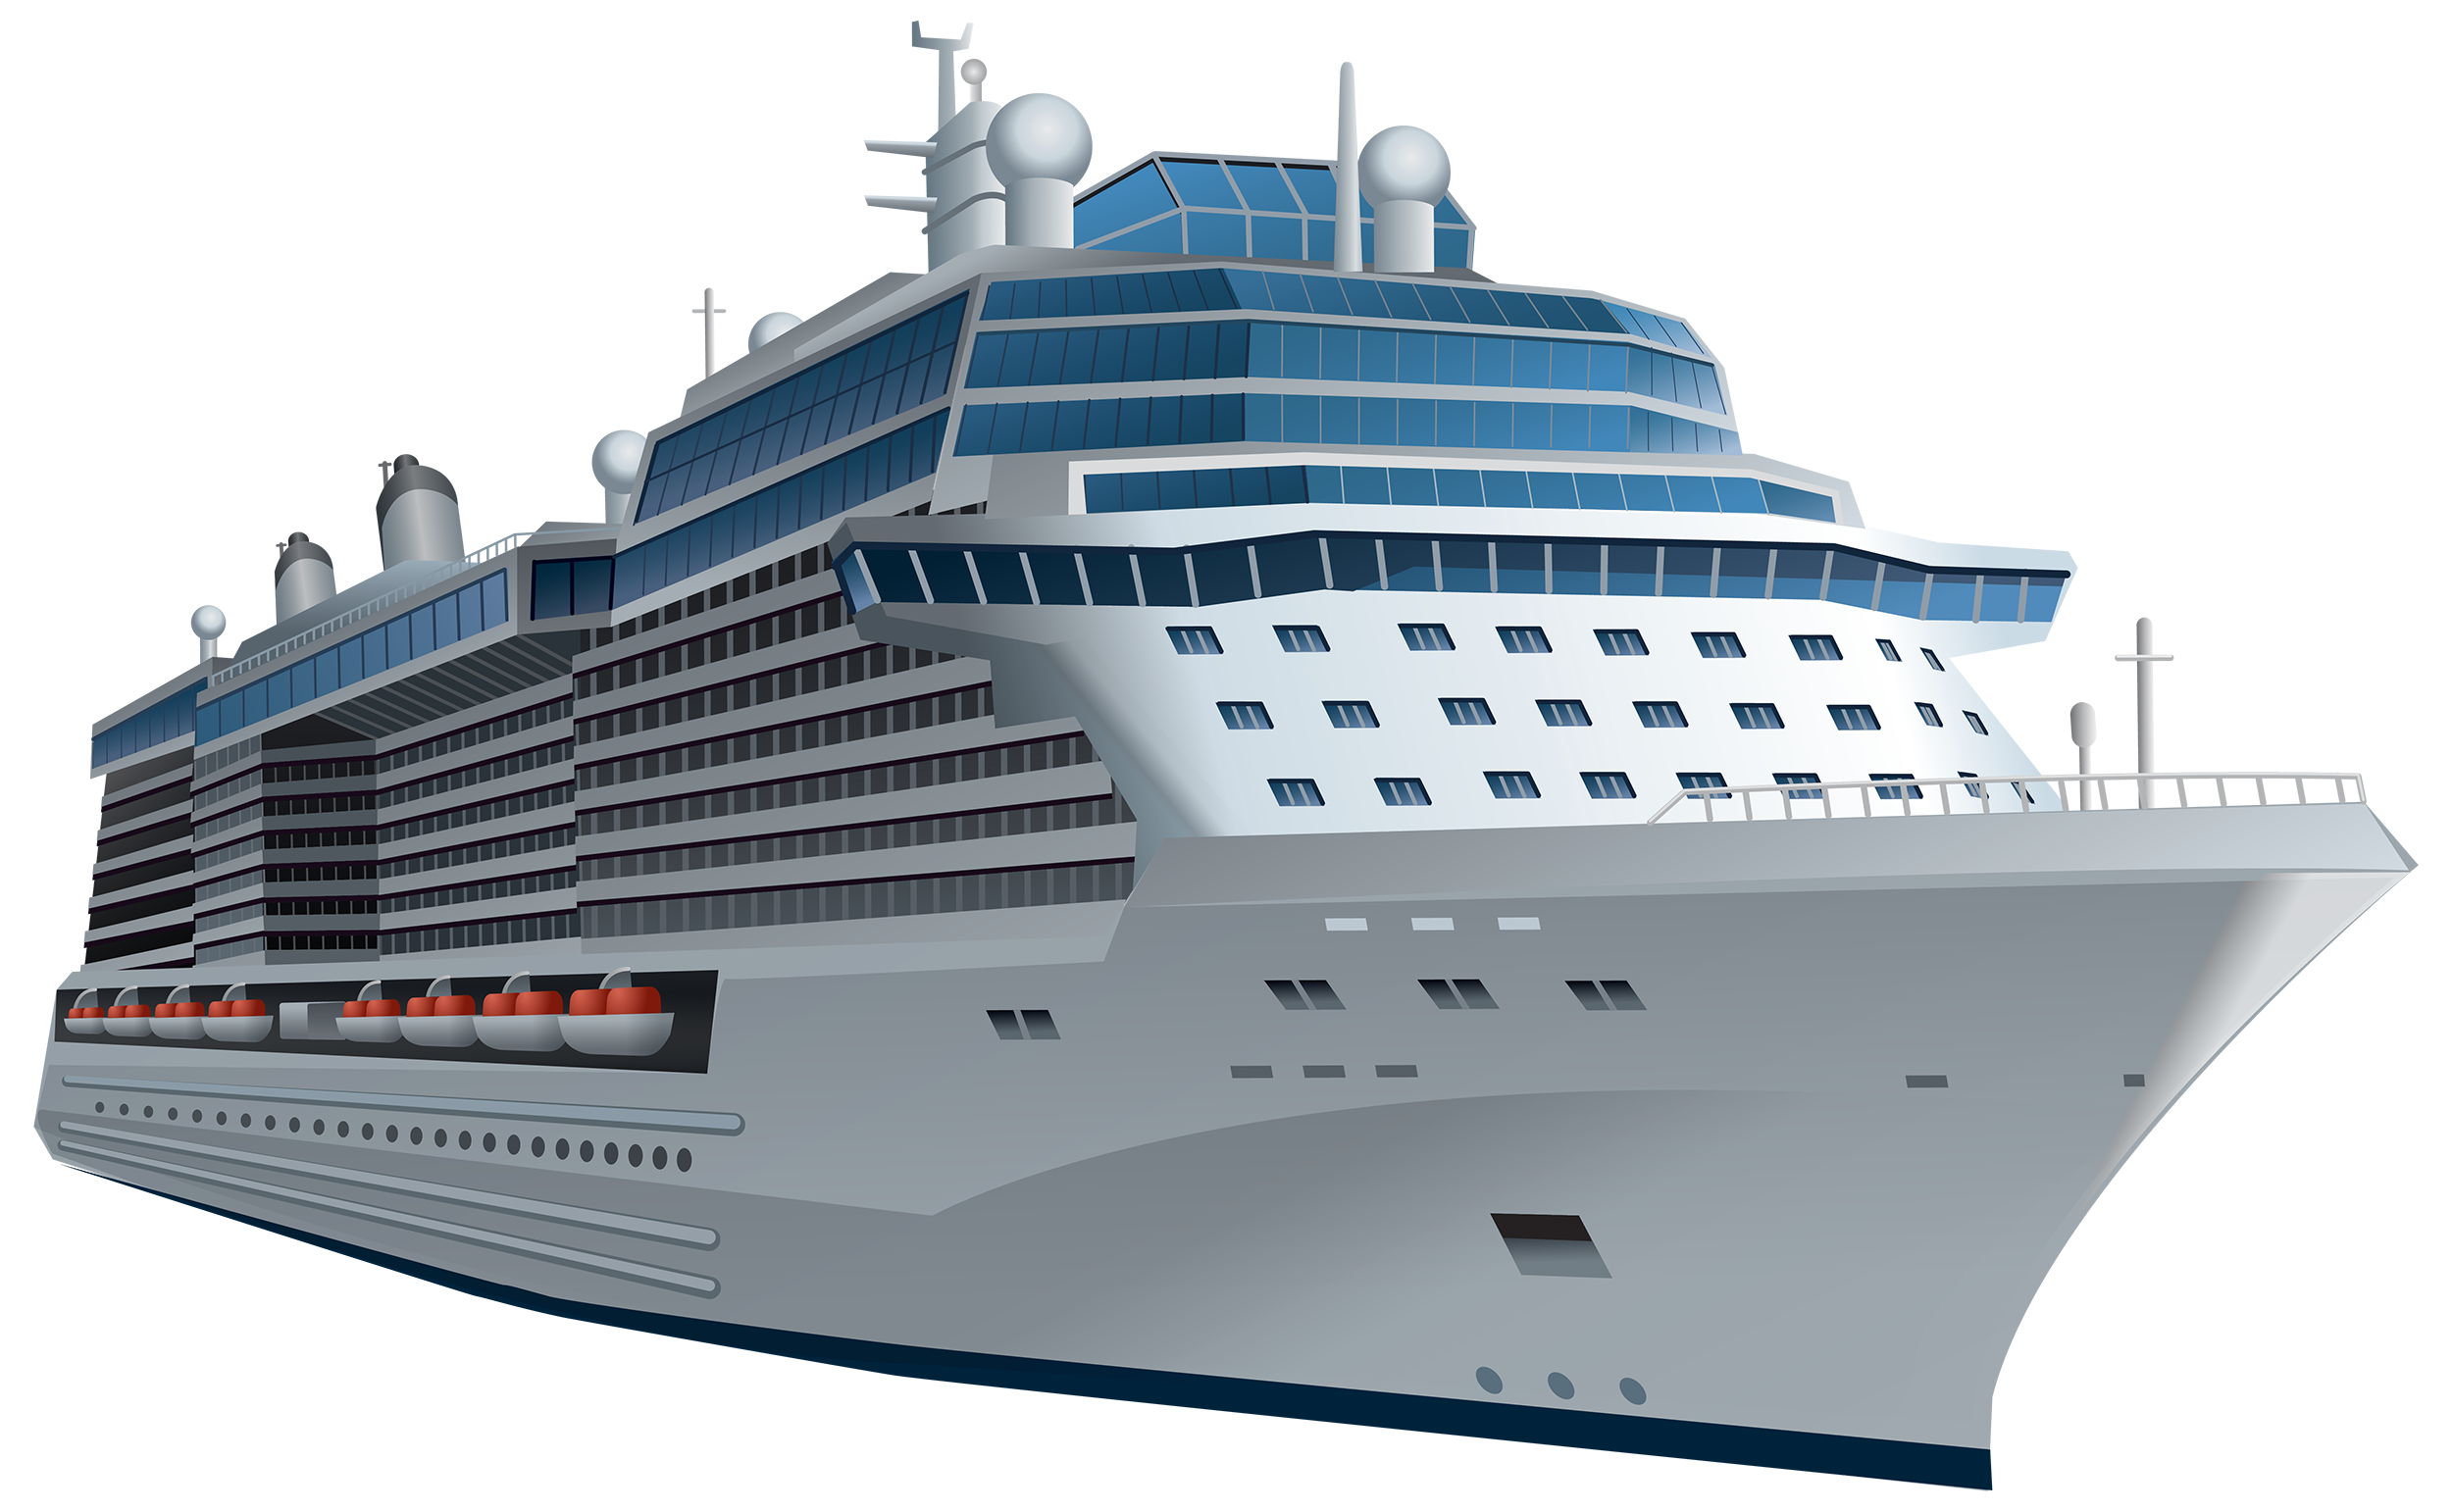 free clipart images cruise ships - photo #43